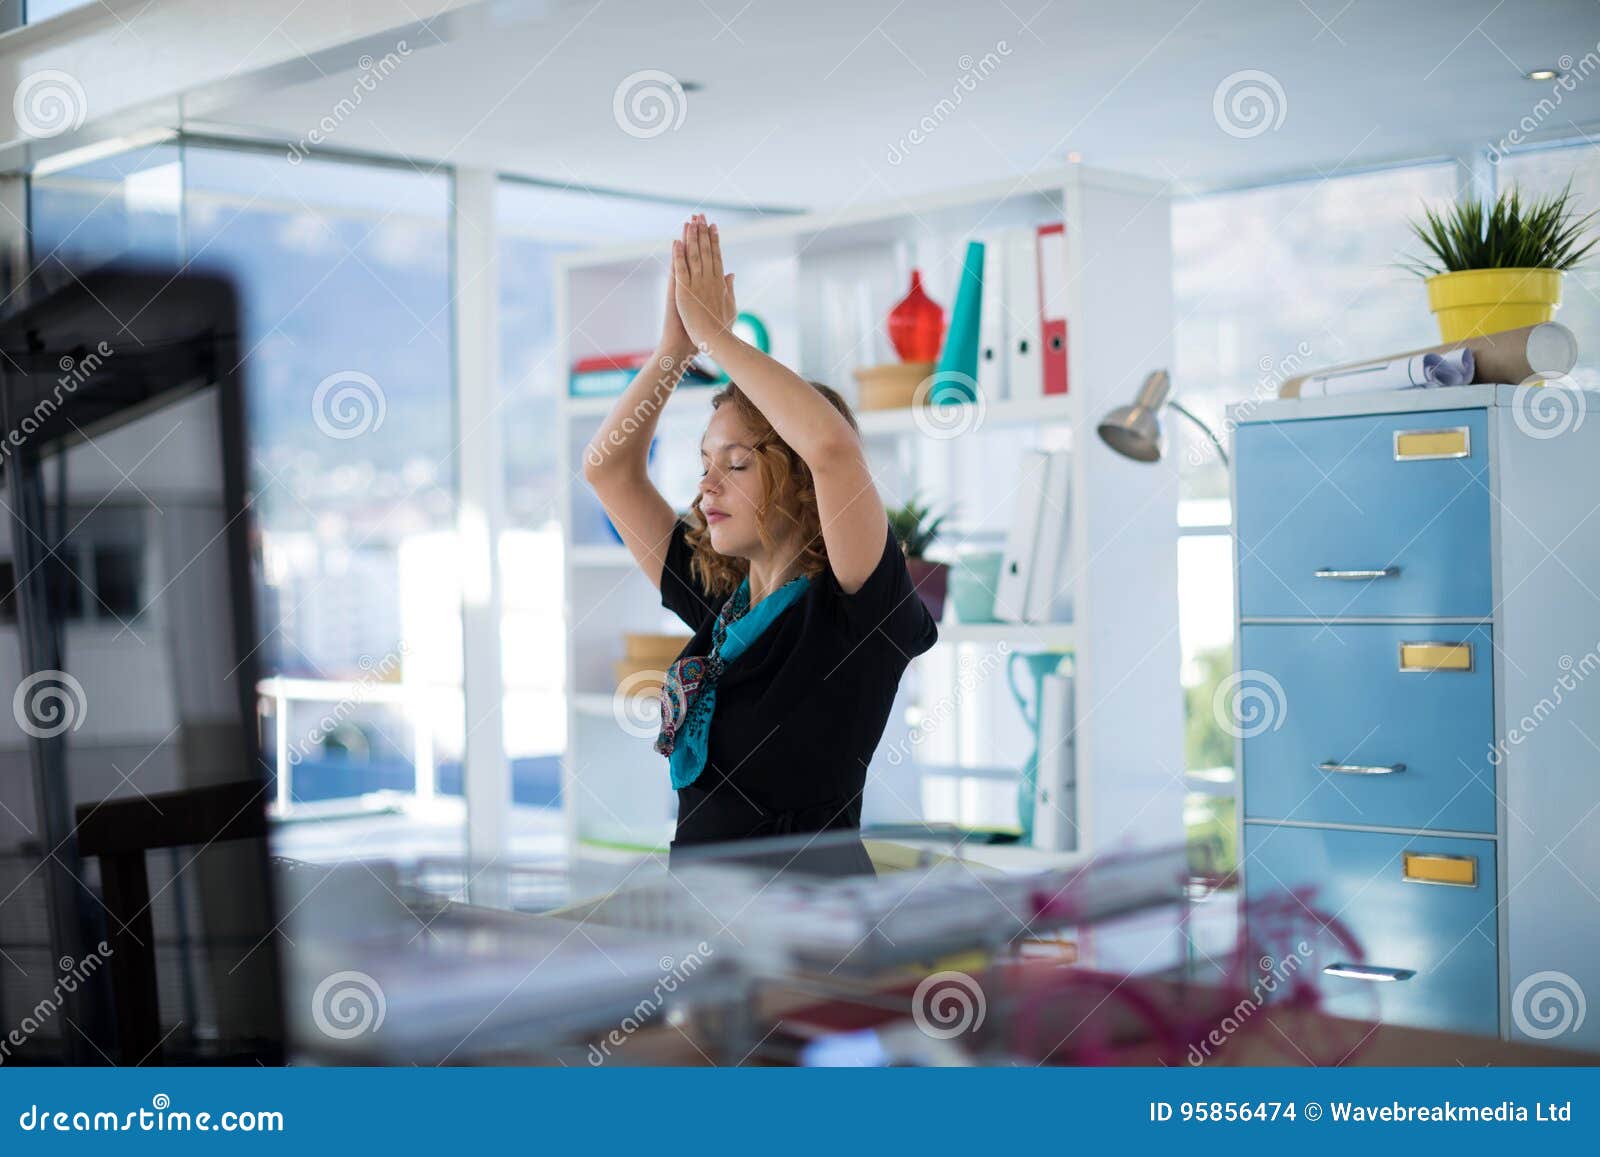 Female Executive Doing Yoga In Office Stock Photo Image Of